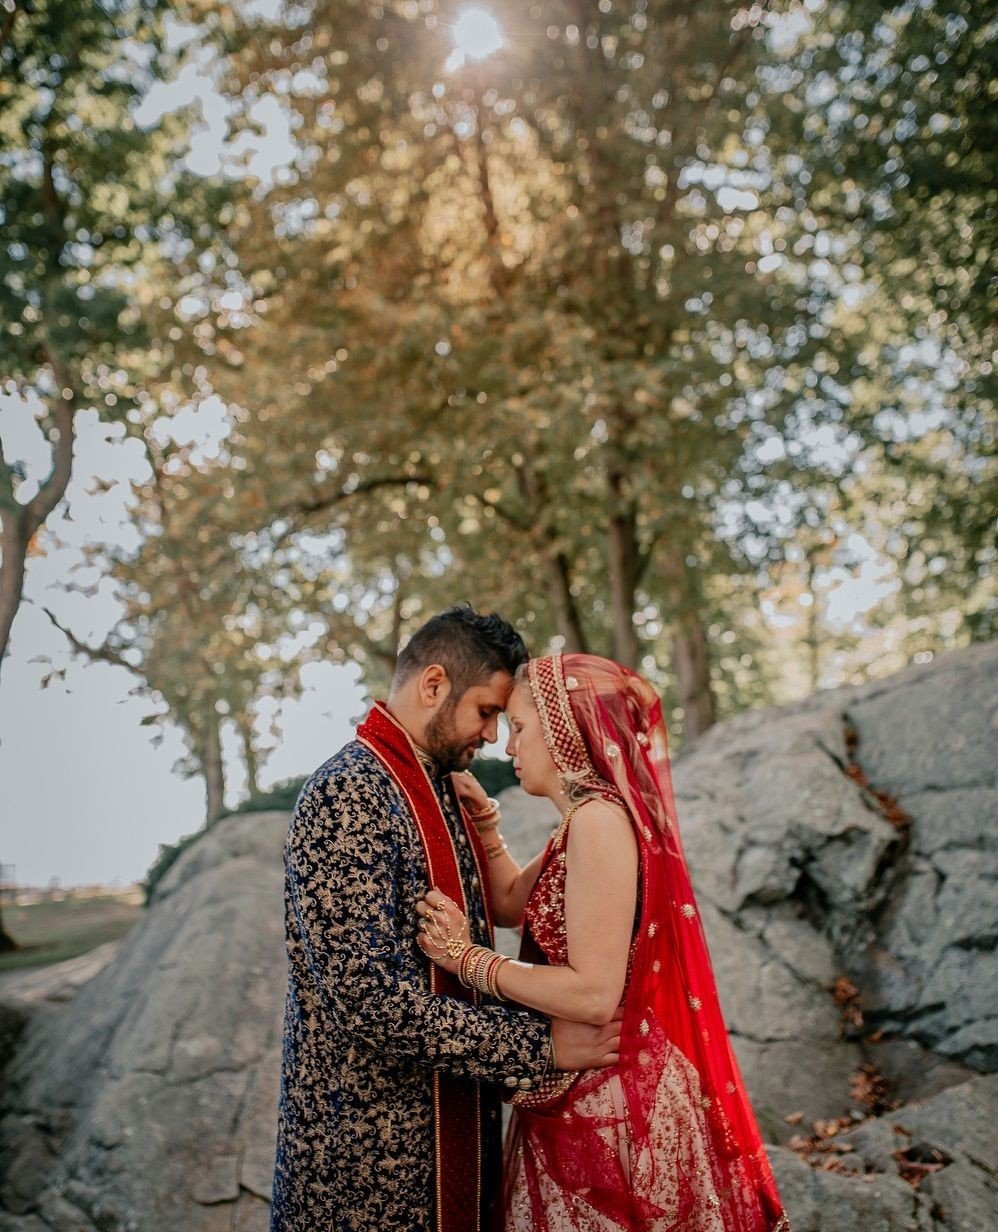 From a swipe right on Bumble to a weekend of multicultural celebrations, Caitlin &amp; Kesal's love story had all the right chapters. ✨️⁠
⁠
We loved blending traditional and modern elements to make their wedding a personal dream come true⁠ for these 